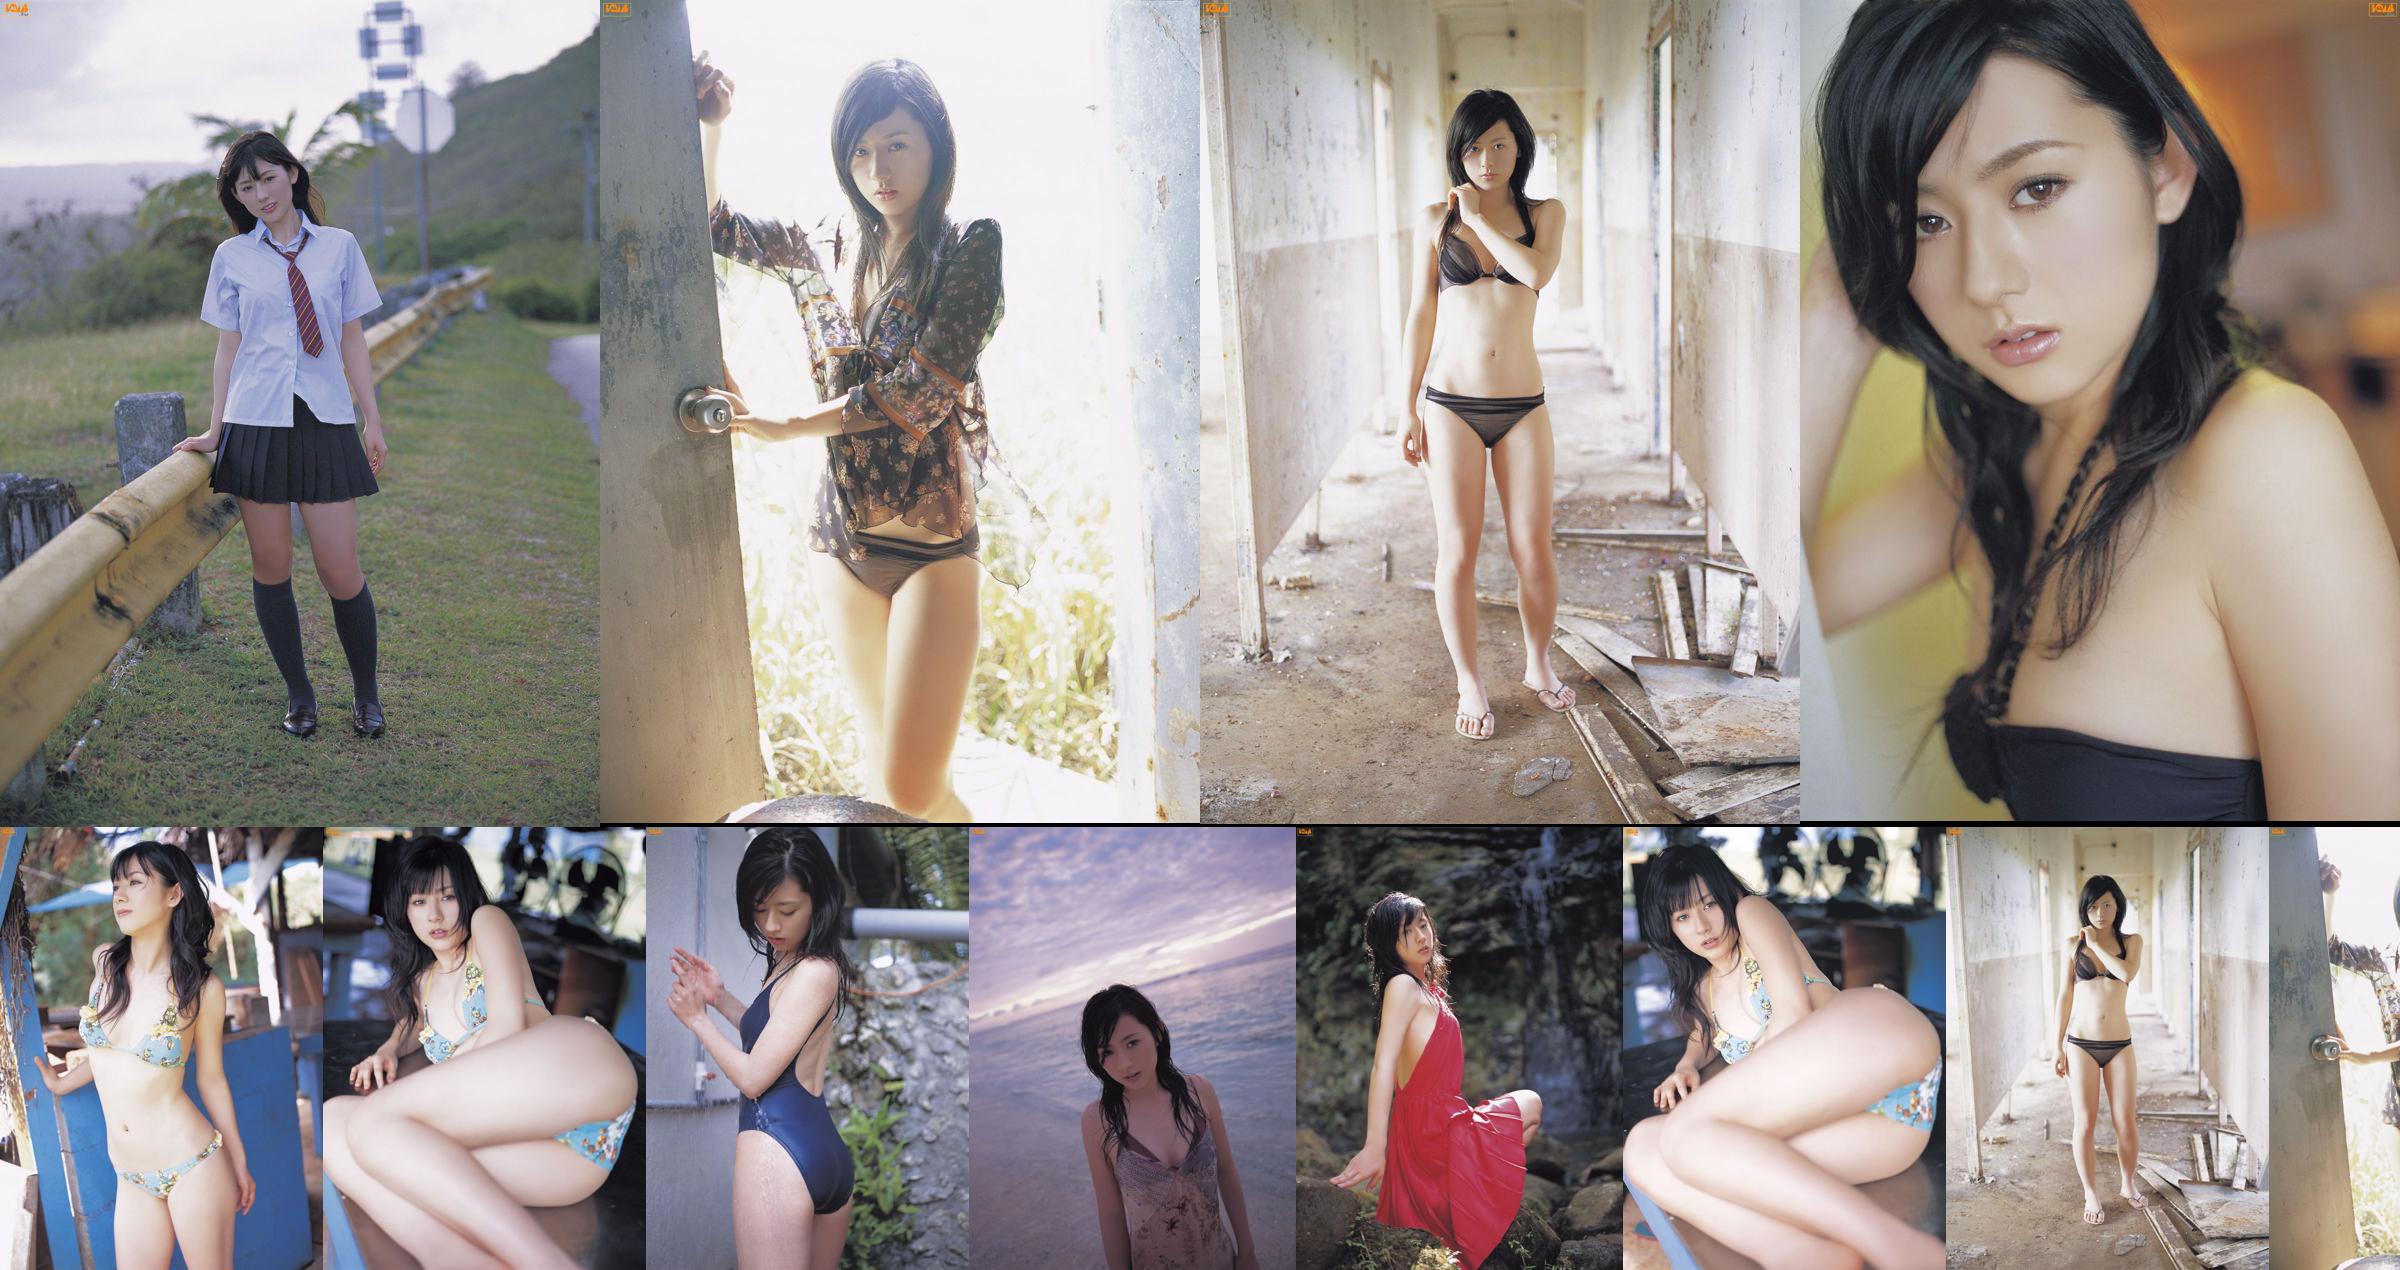 [Bomb.TV] May 2007 Miki Inase Miki Reo / Miki Reo No.59905f Page 1